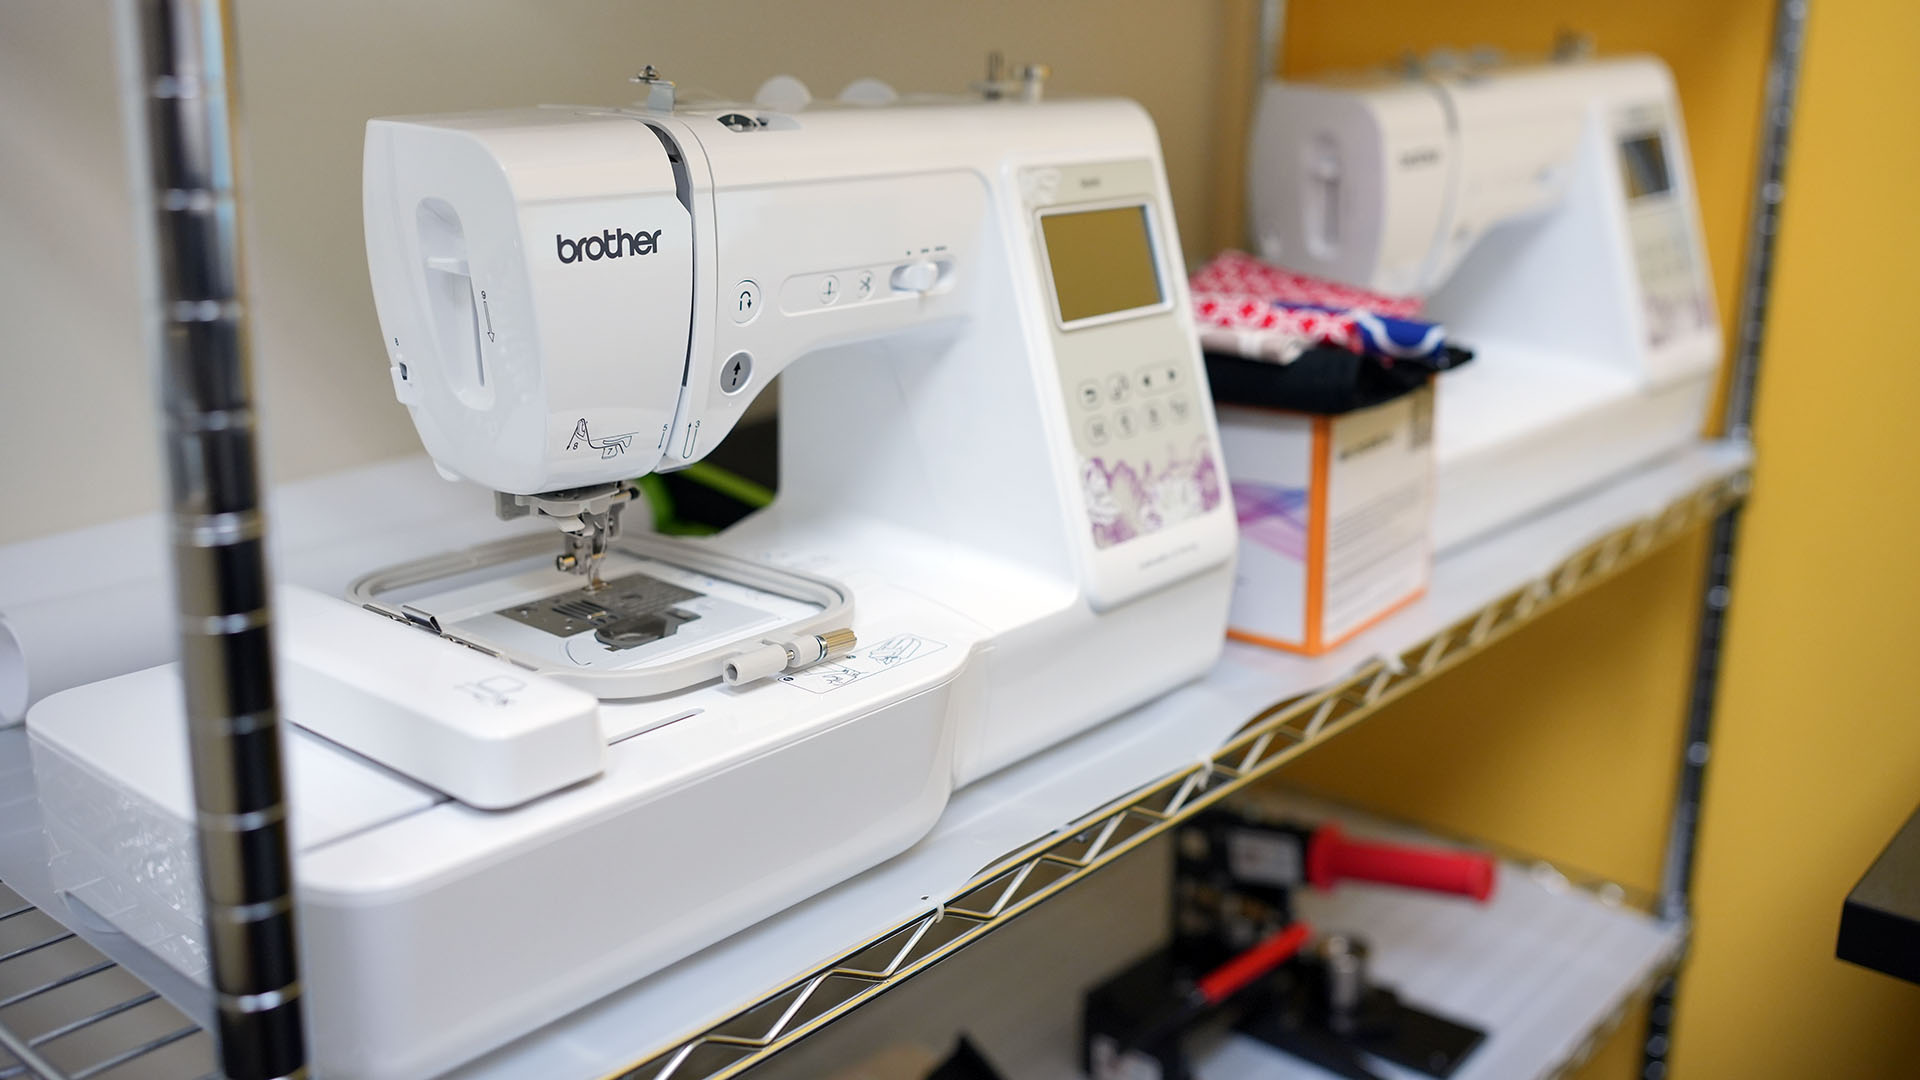 Sewing machines in Scott Northern Wake Campus library makerspace